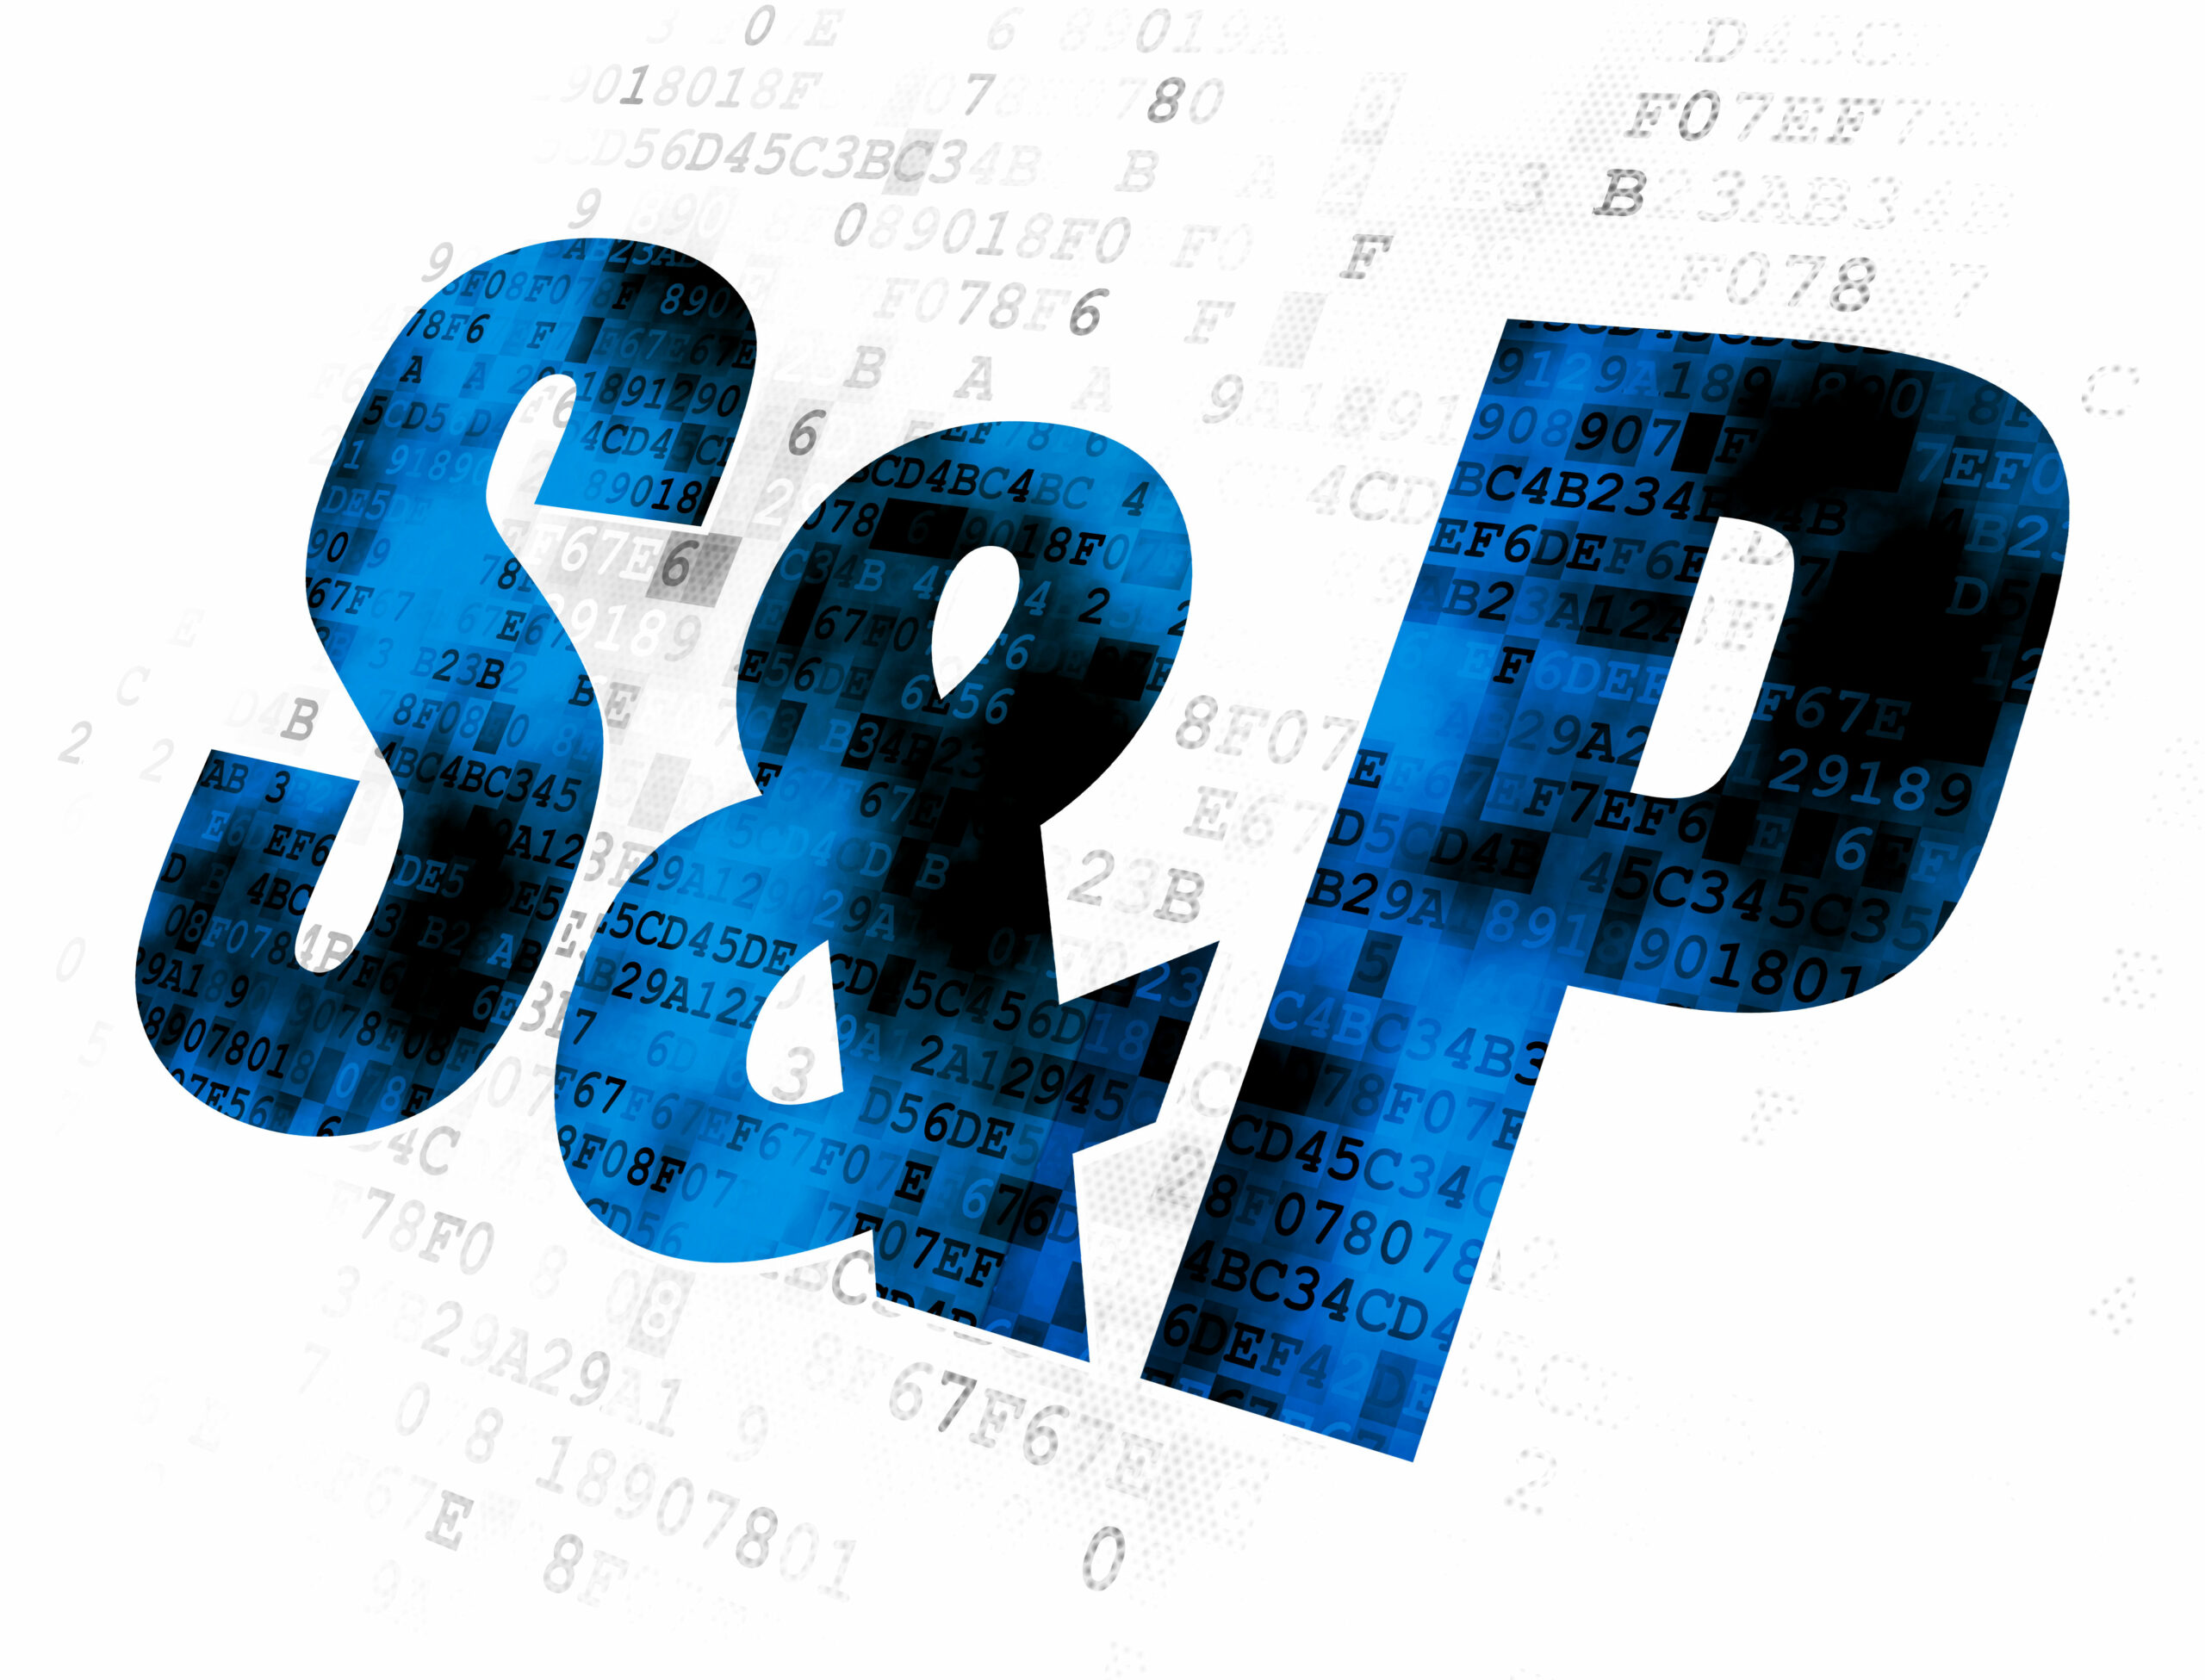 Stock market indexes concept: S&P on Digital background